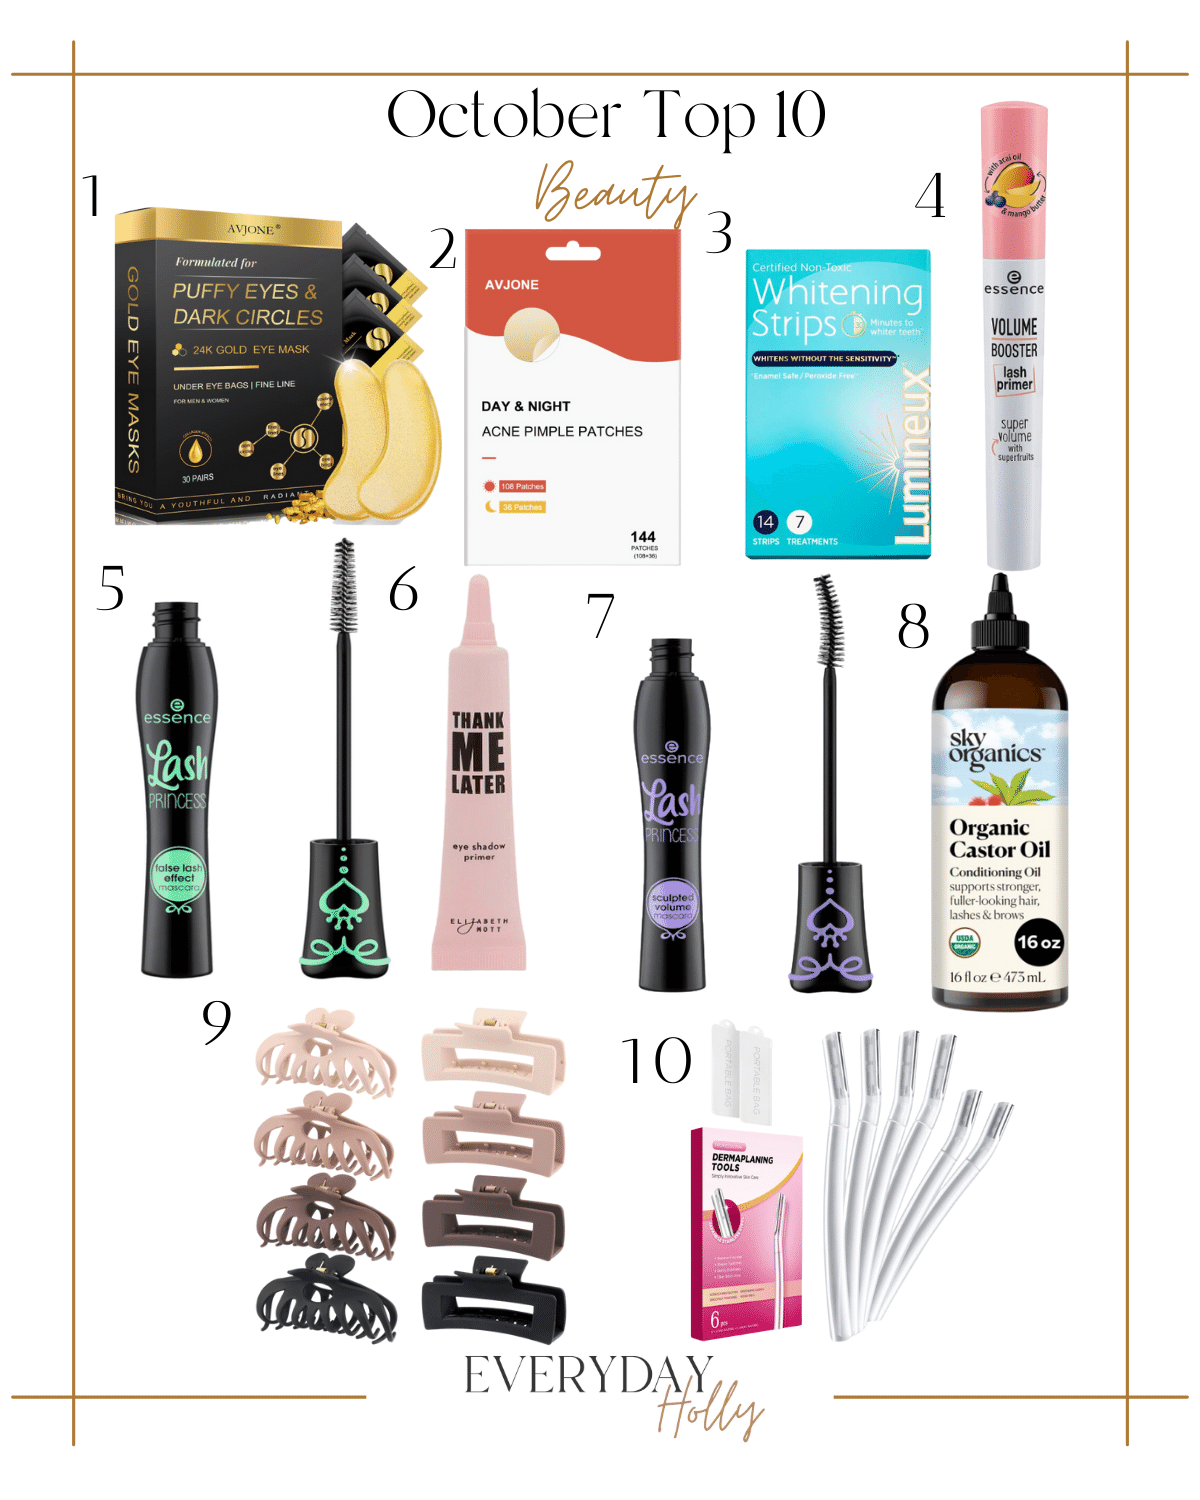 top 10 hottest best sellers from october | #top10 #bestseller #october #eyemask #skincare #selfcare #beauty #pimplepatch #teethwhitening #lashes #primer #castoroil #clawclip #hair